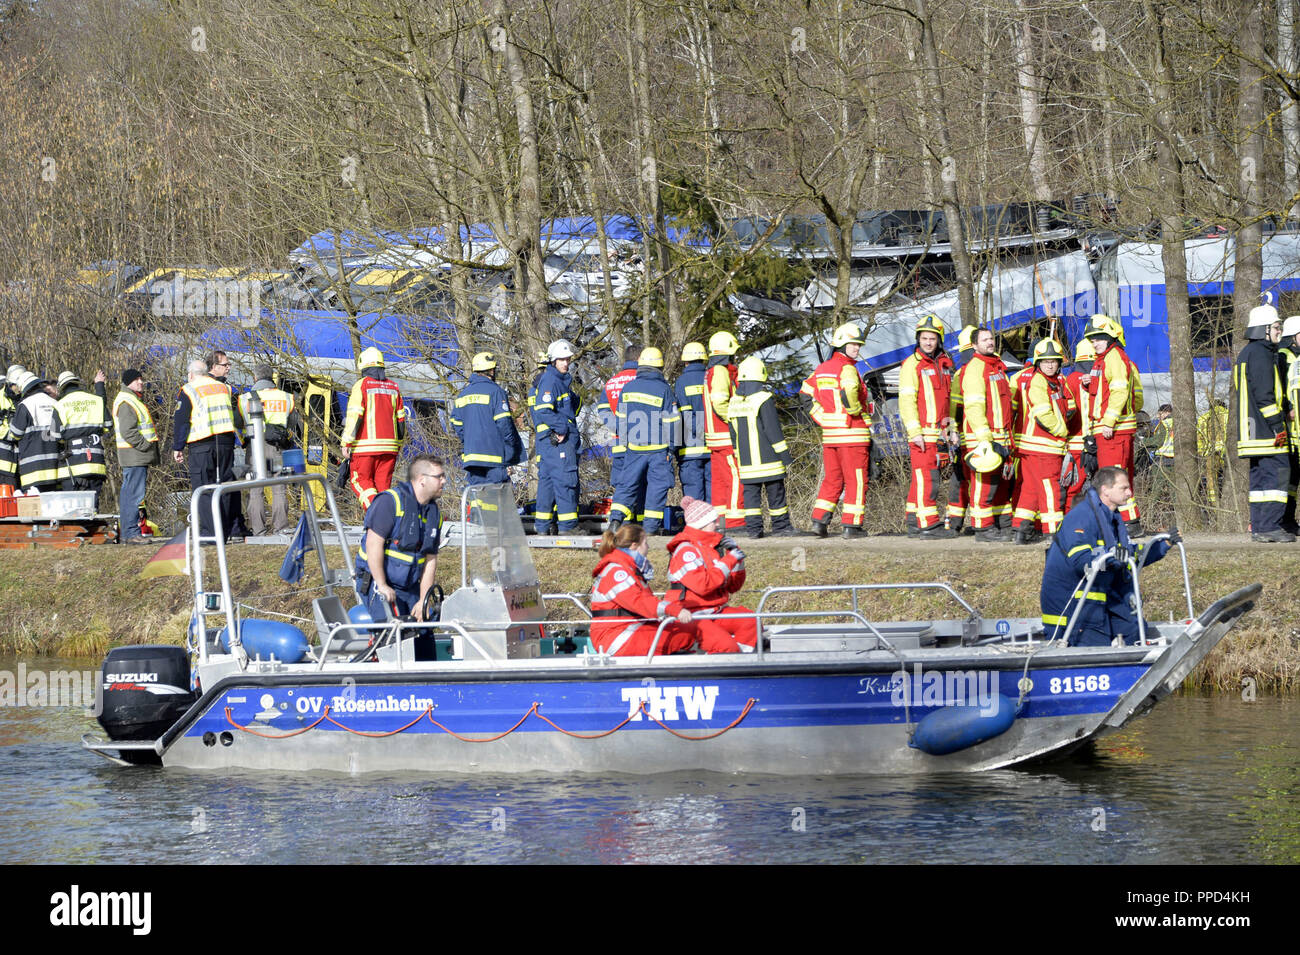 After the frontal collision of two meridian trains at Bad Aibling, rescue workers from the fire brigade, the police, the Bergwacht (mountain rescue service), Wasserwacht (water rescue service), the Red Cross and the Technisches Hilfswerk (in the picture with boats on the Mangfall) trying to rescue the injured and salvage the bodies of those killed. Stock Photo